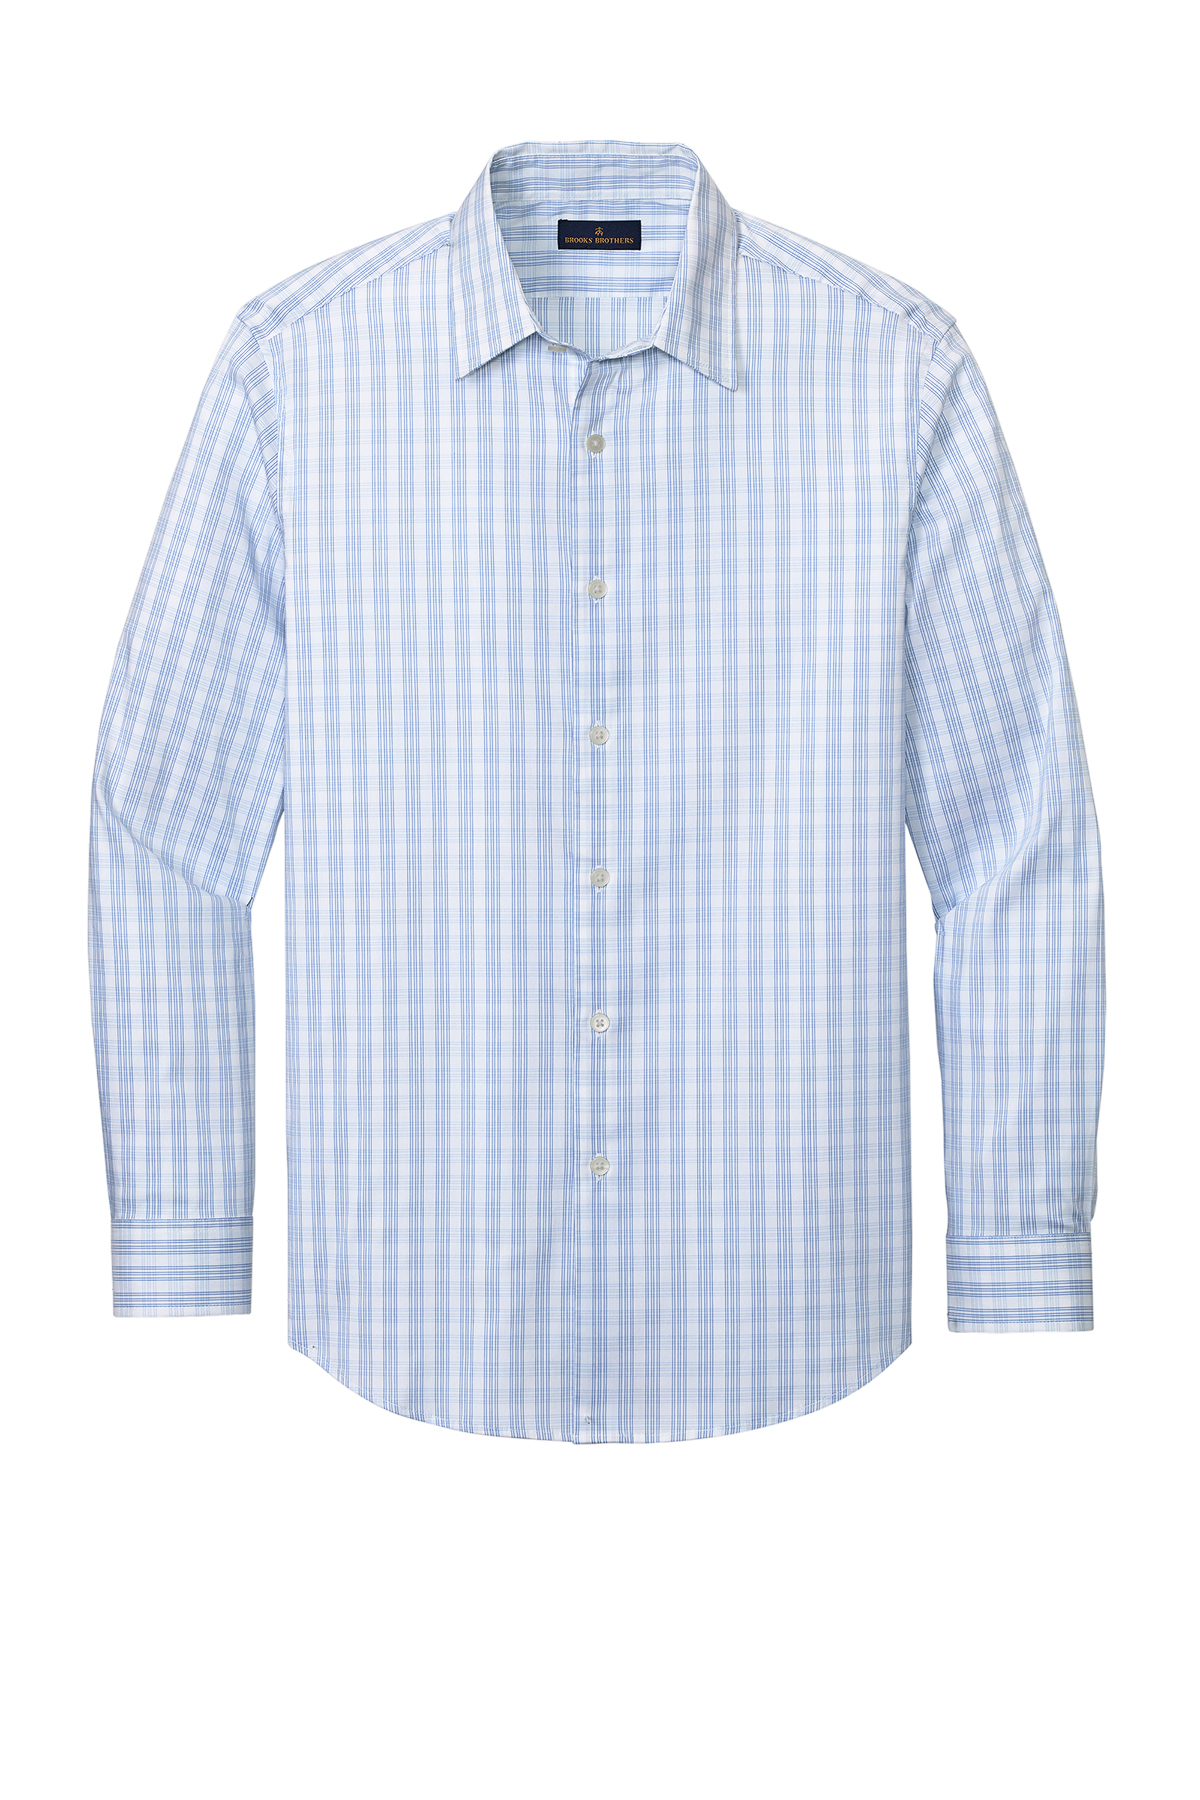 Brooks Brothers Tech Stretch Patterned Shirt | Product | SanMar